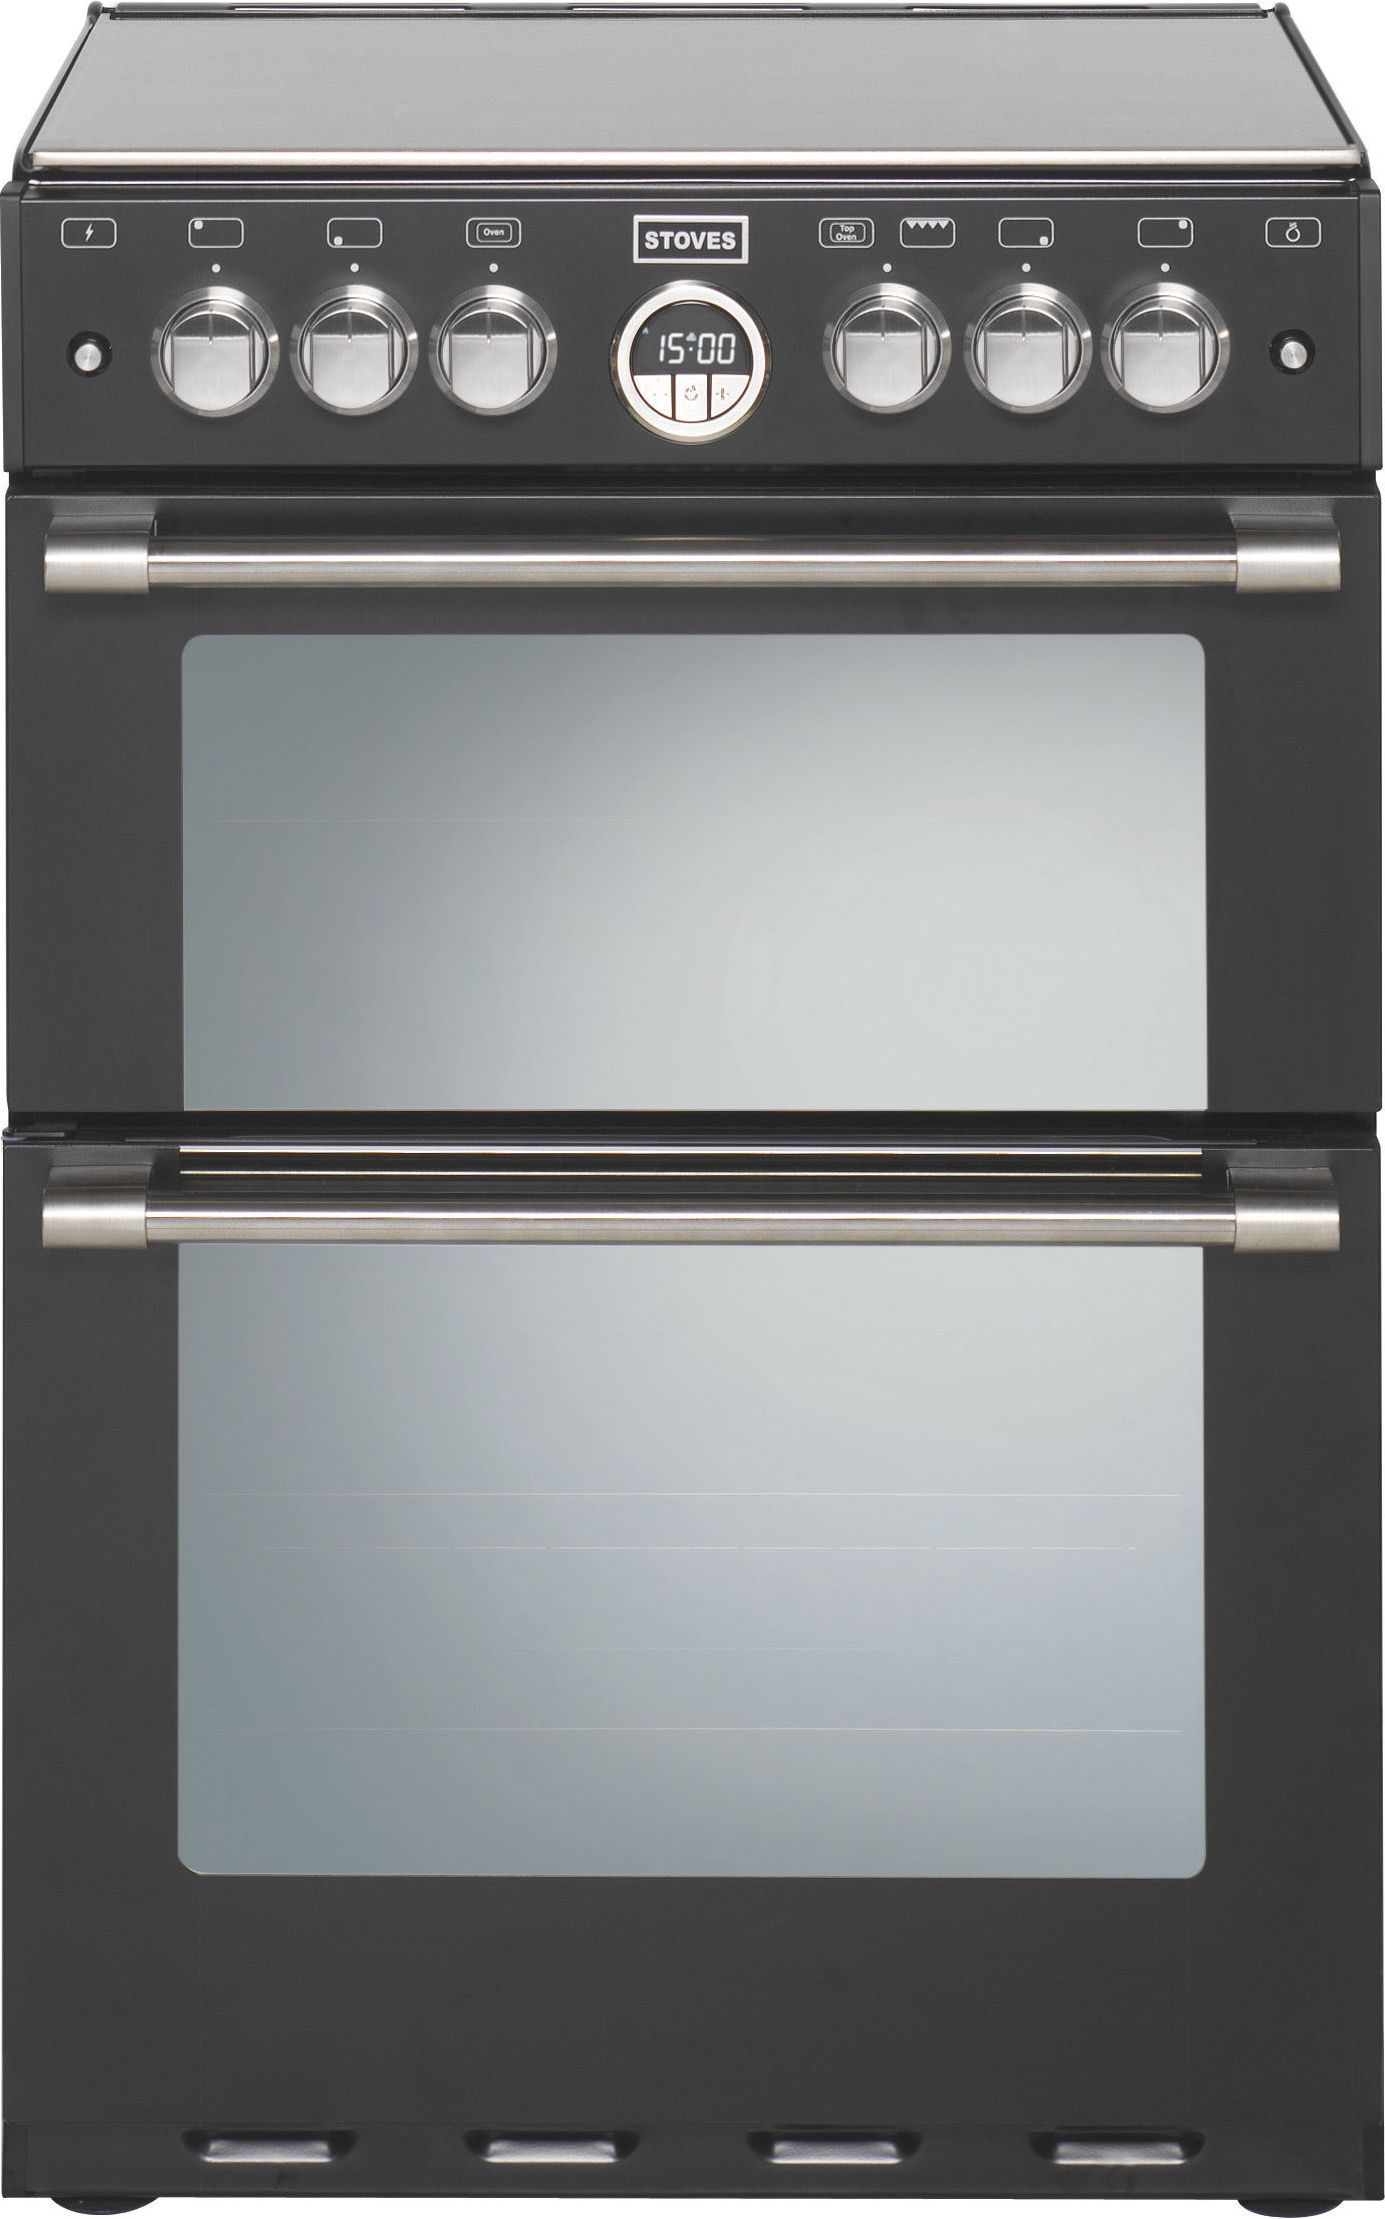 Stoves Sterling STERLING600G 60cm Freestanding Gas Cooker with Full Width Electric Grill - Black - A/A Rated, Black